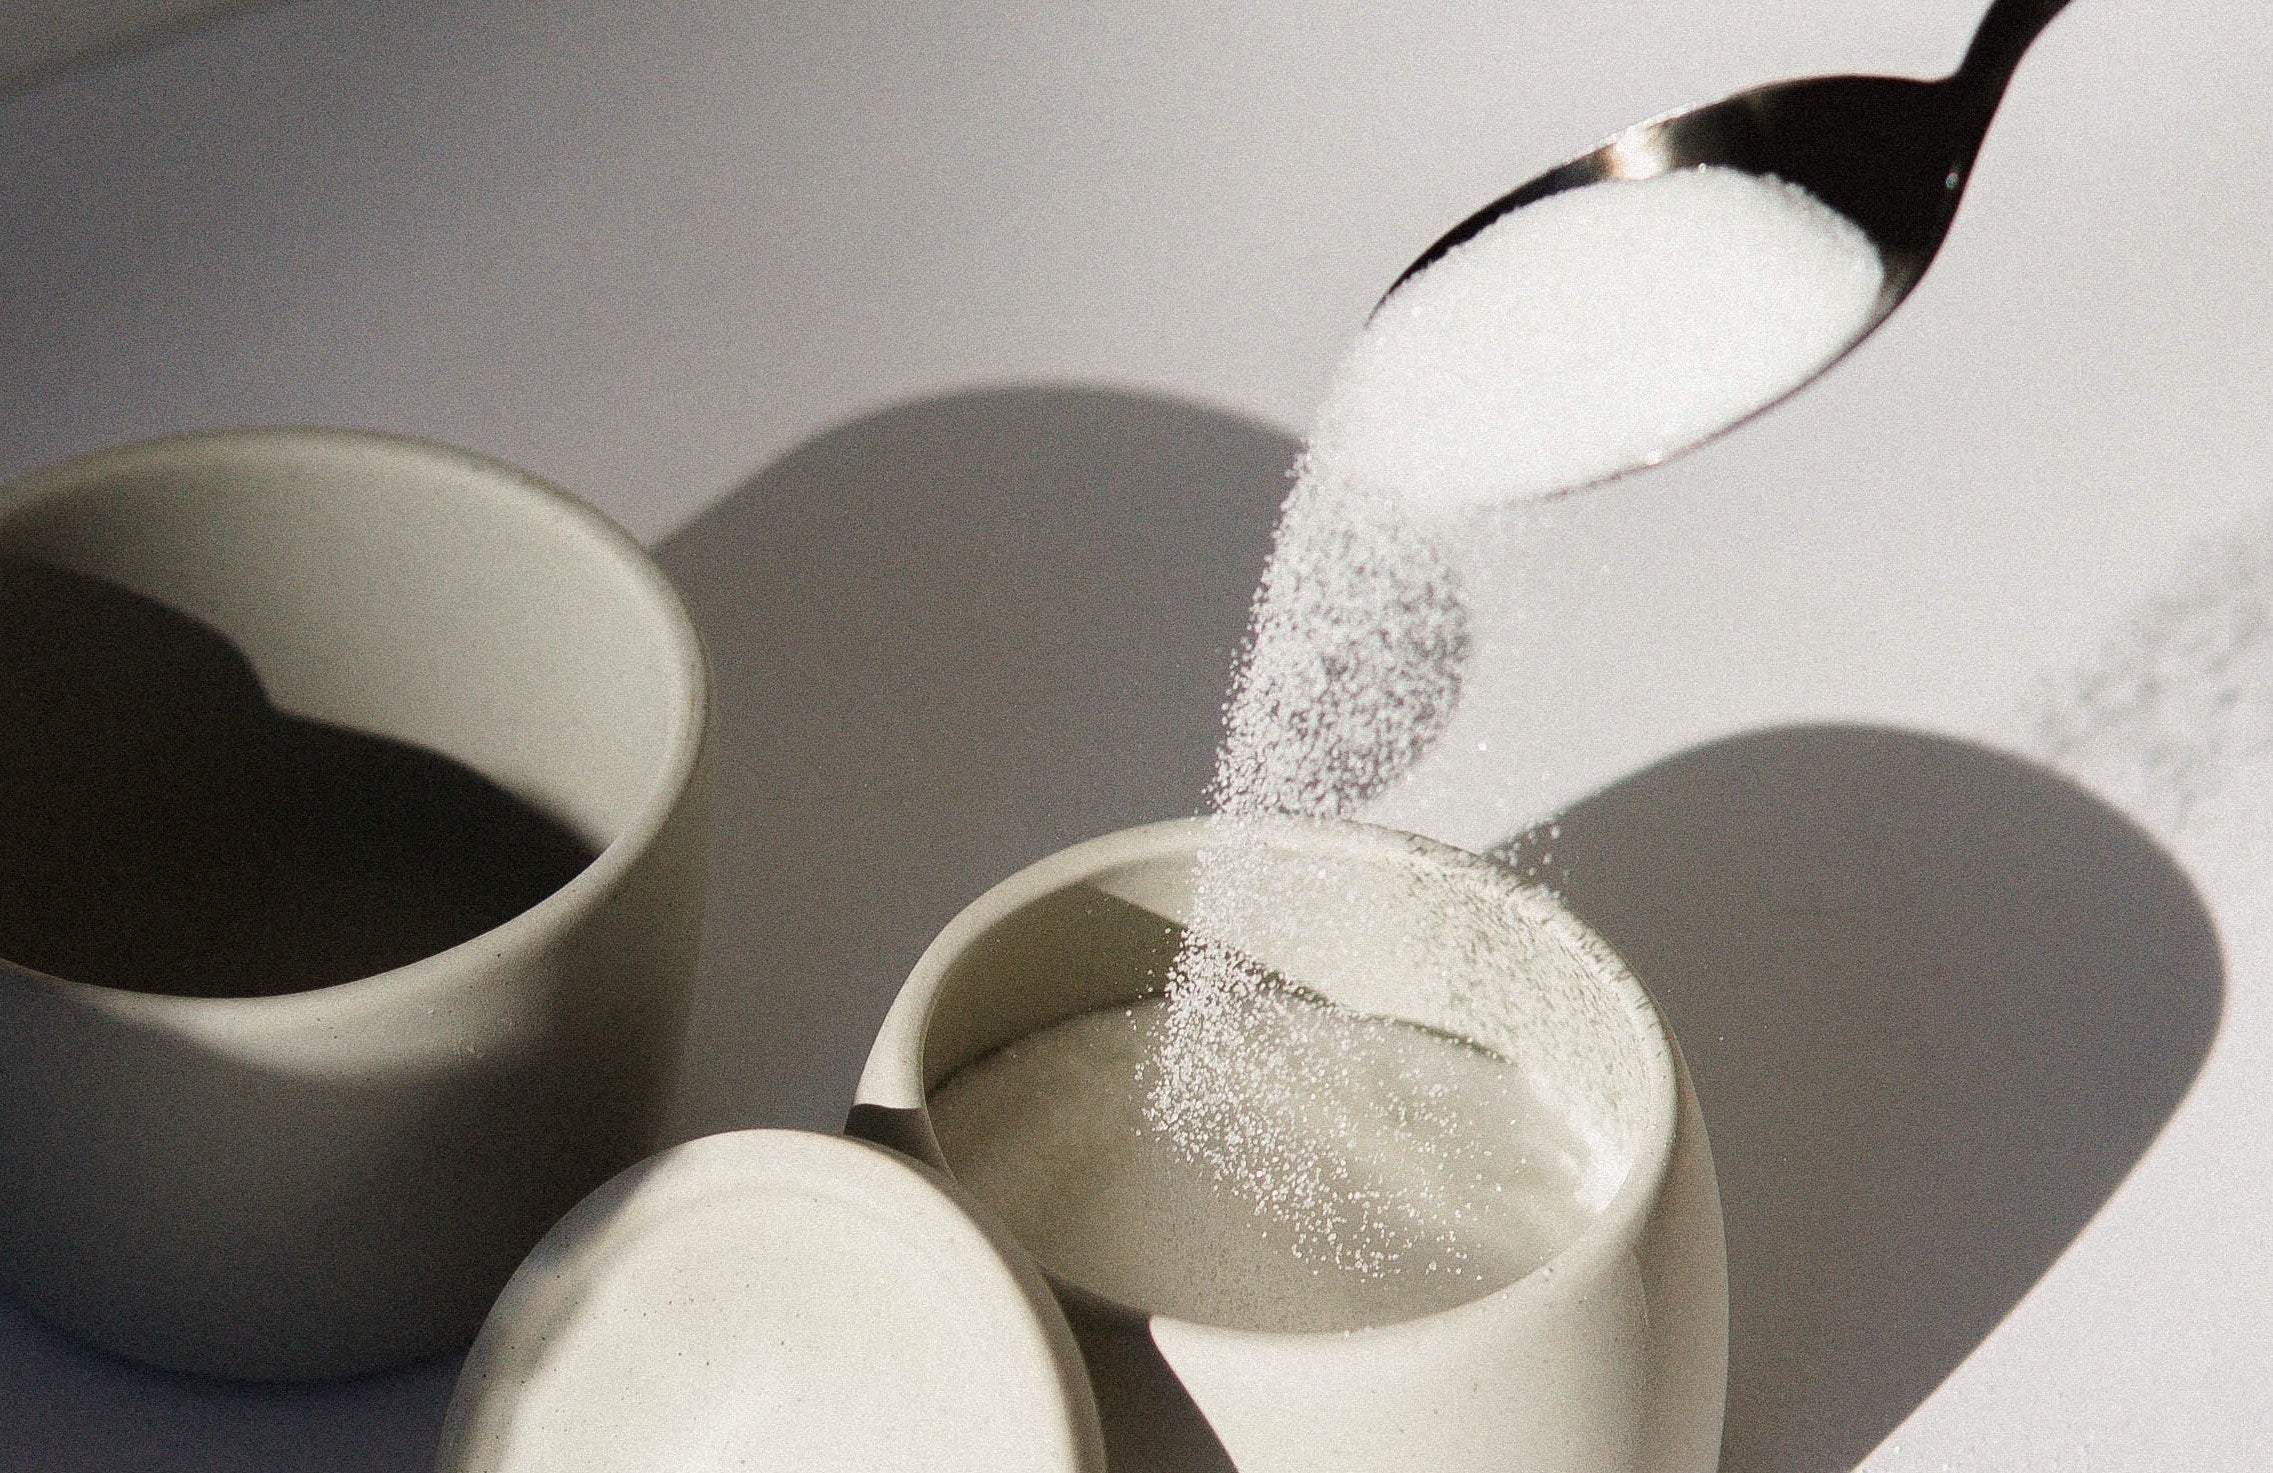 The Benefits Of Incorporating Sugar Into Your Skin Care Routine